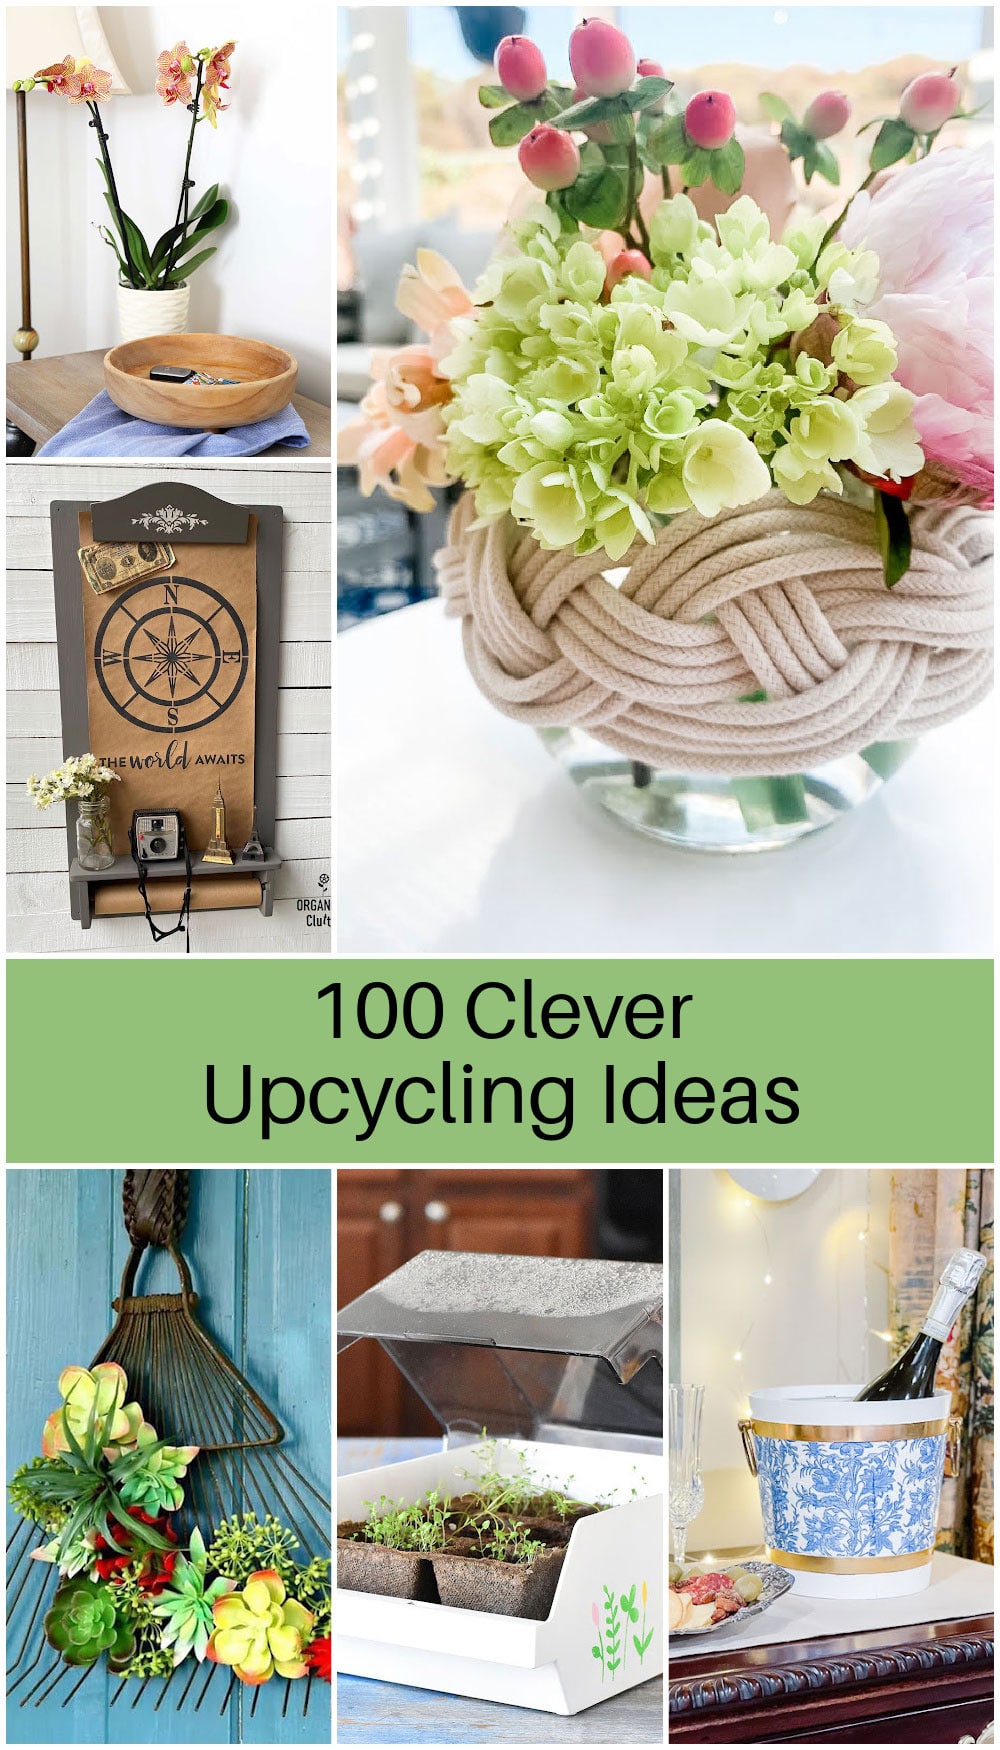 Recycle, Reuse and Repurpose with these 100 clever upcycling ideas! Discover creative thrift store makeover ideas to use around the house.